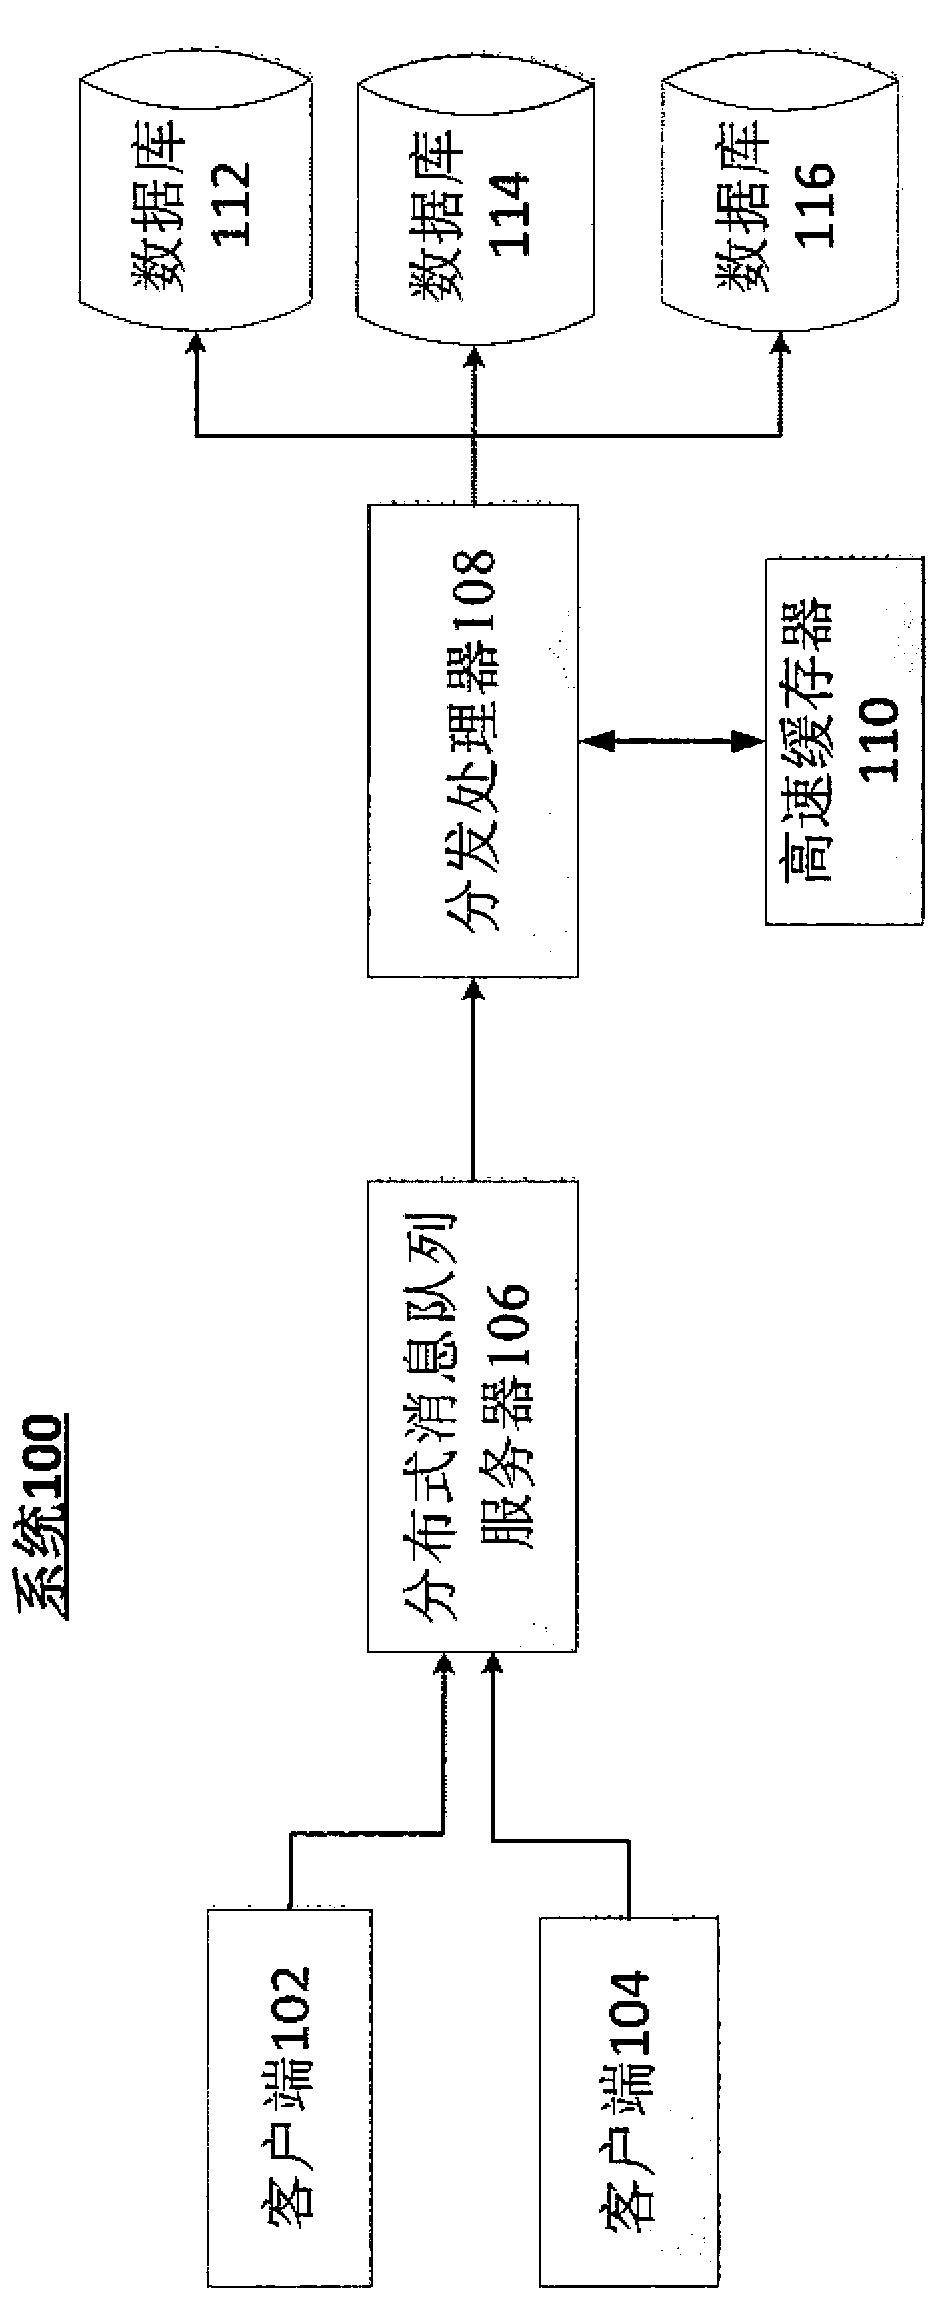 Method and system for distributing and processing mass data passing through message queues